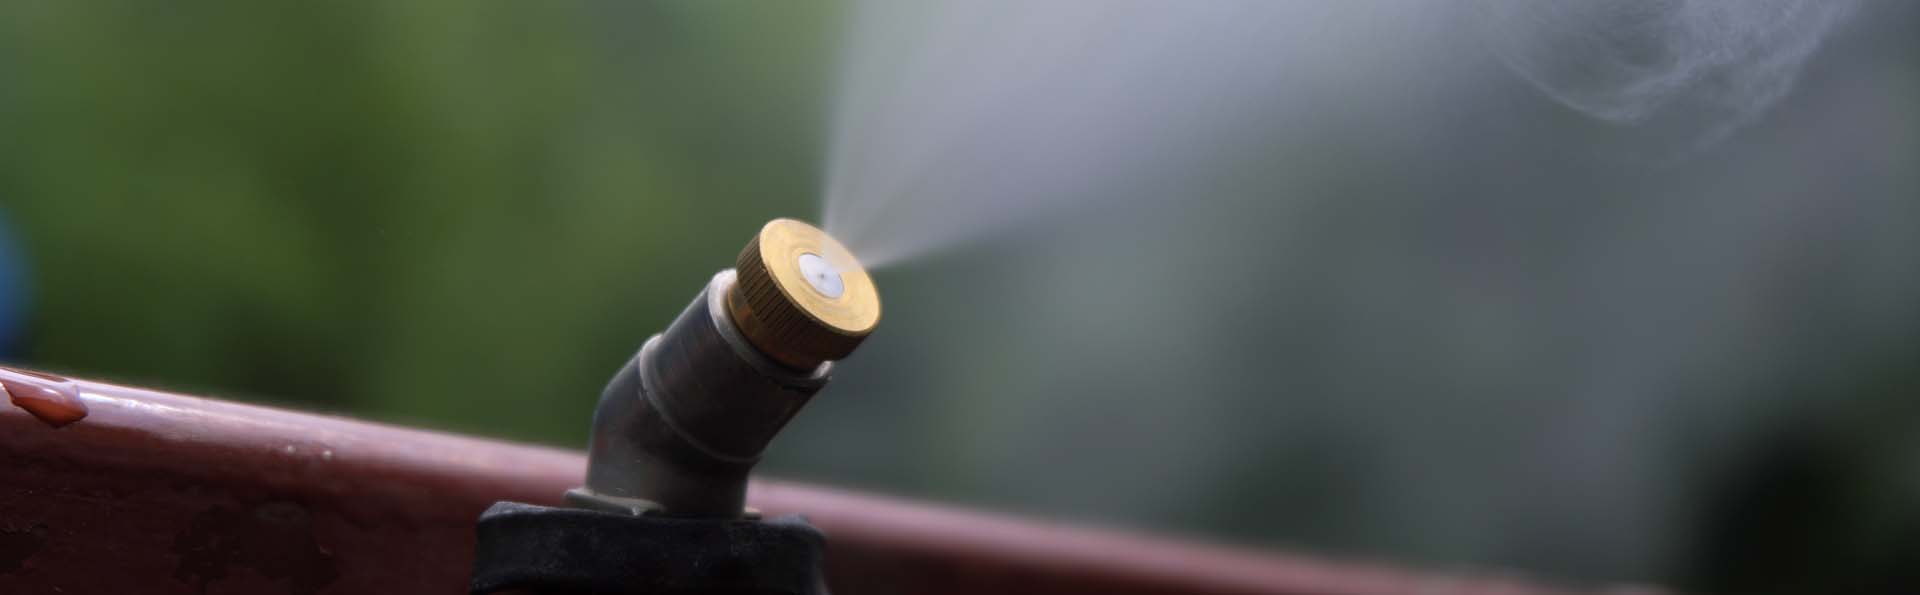 FAQ about mosquito misting systems